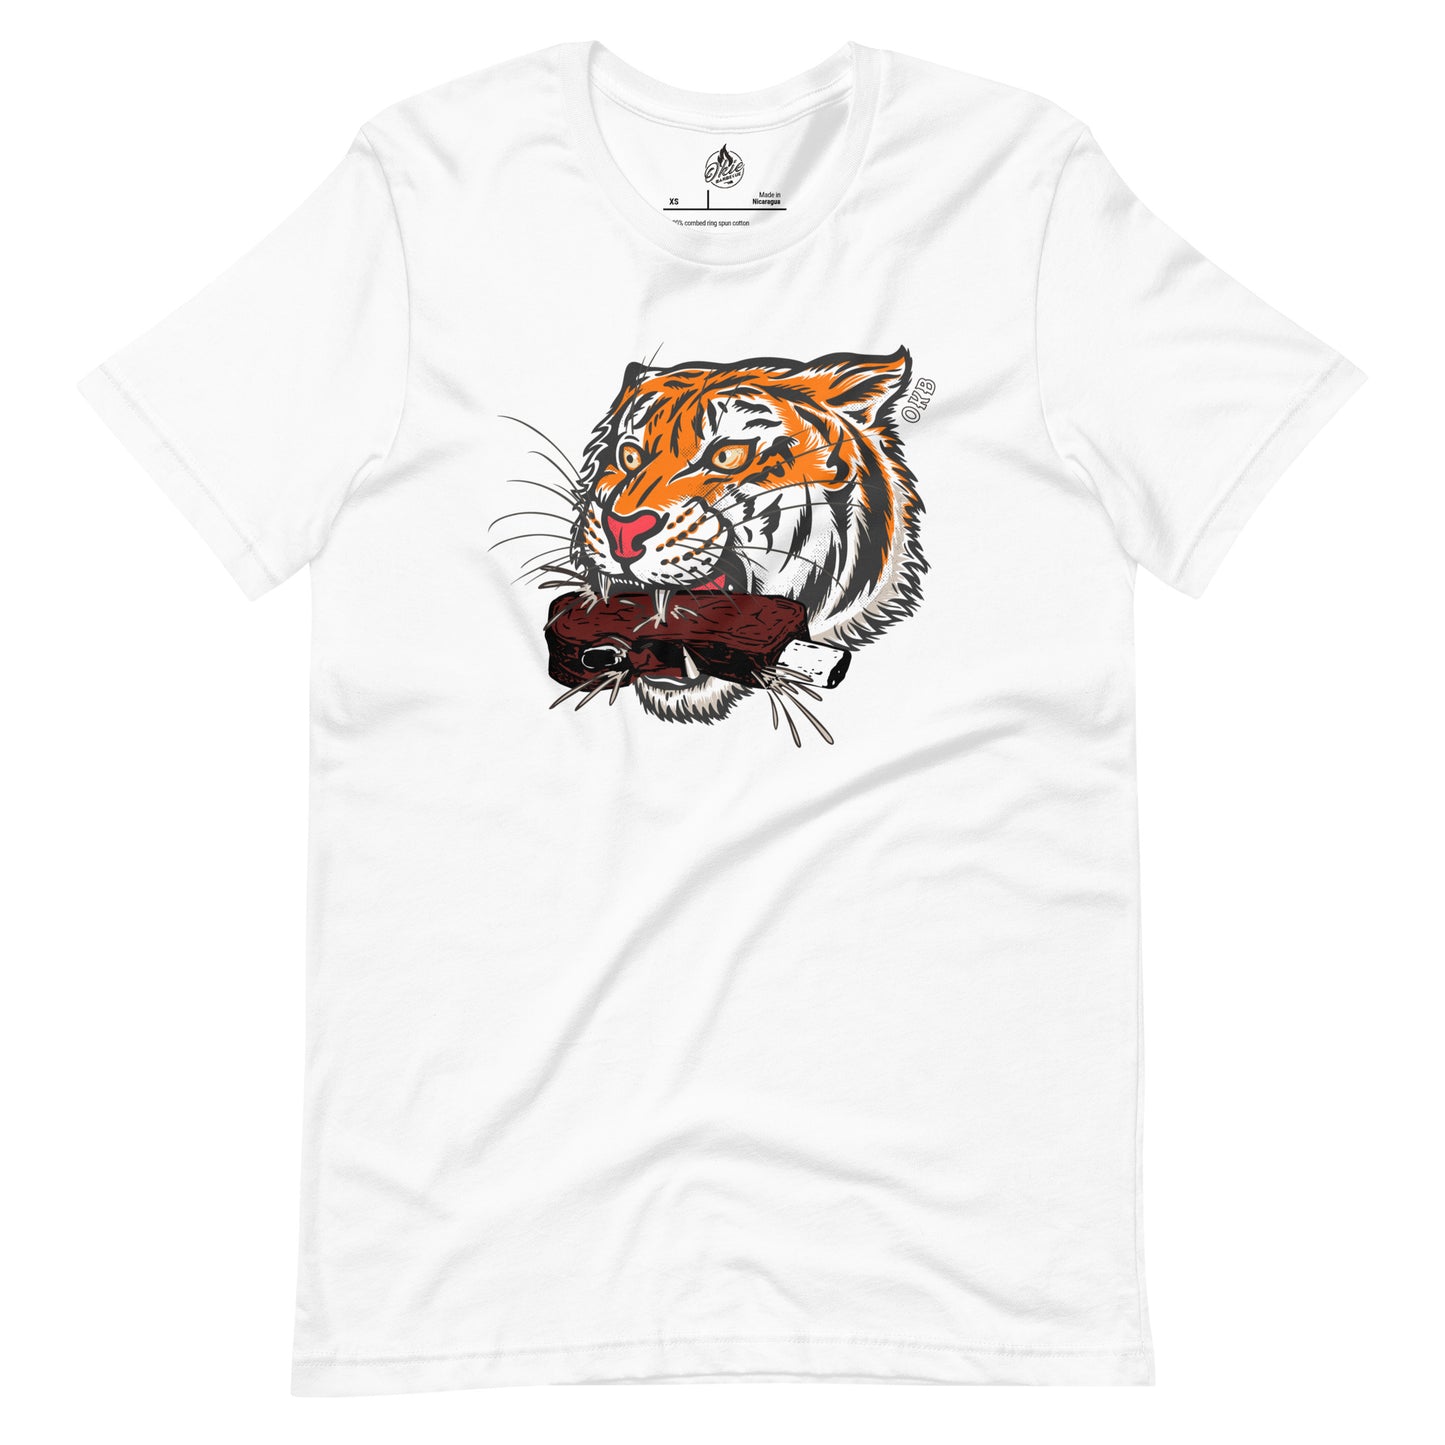 Feed Your Beast t-shirt